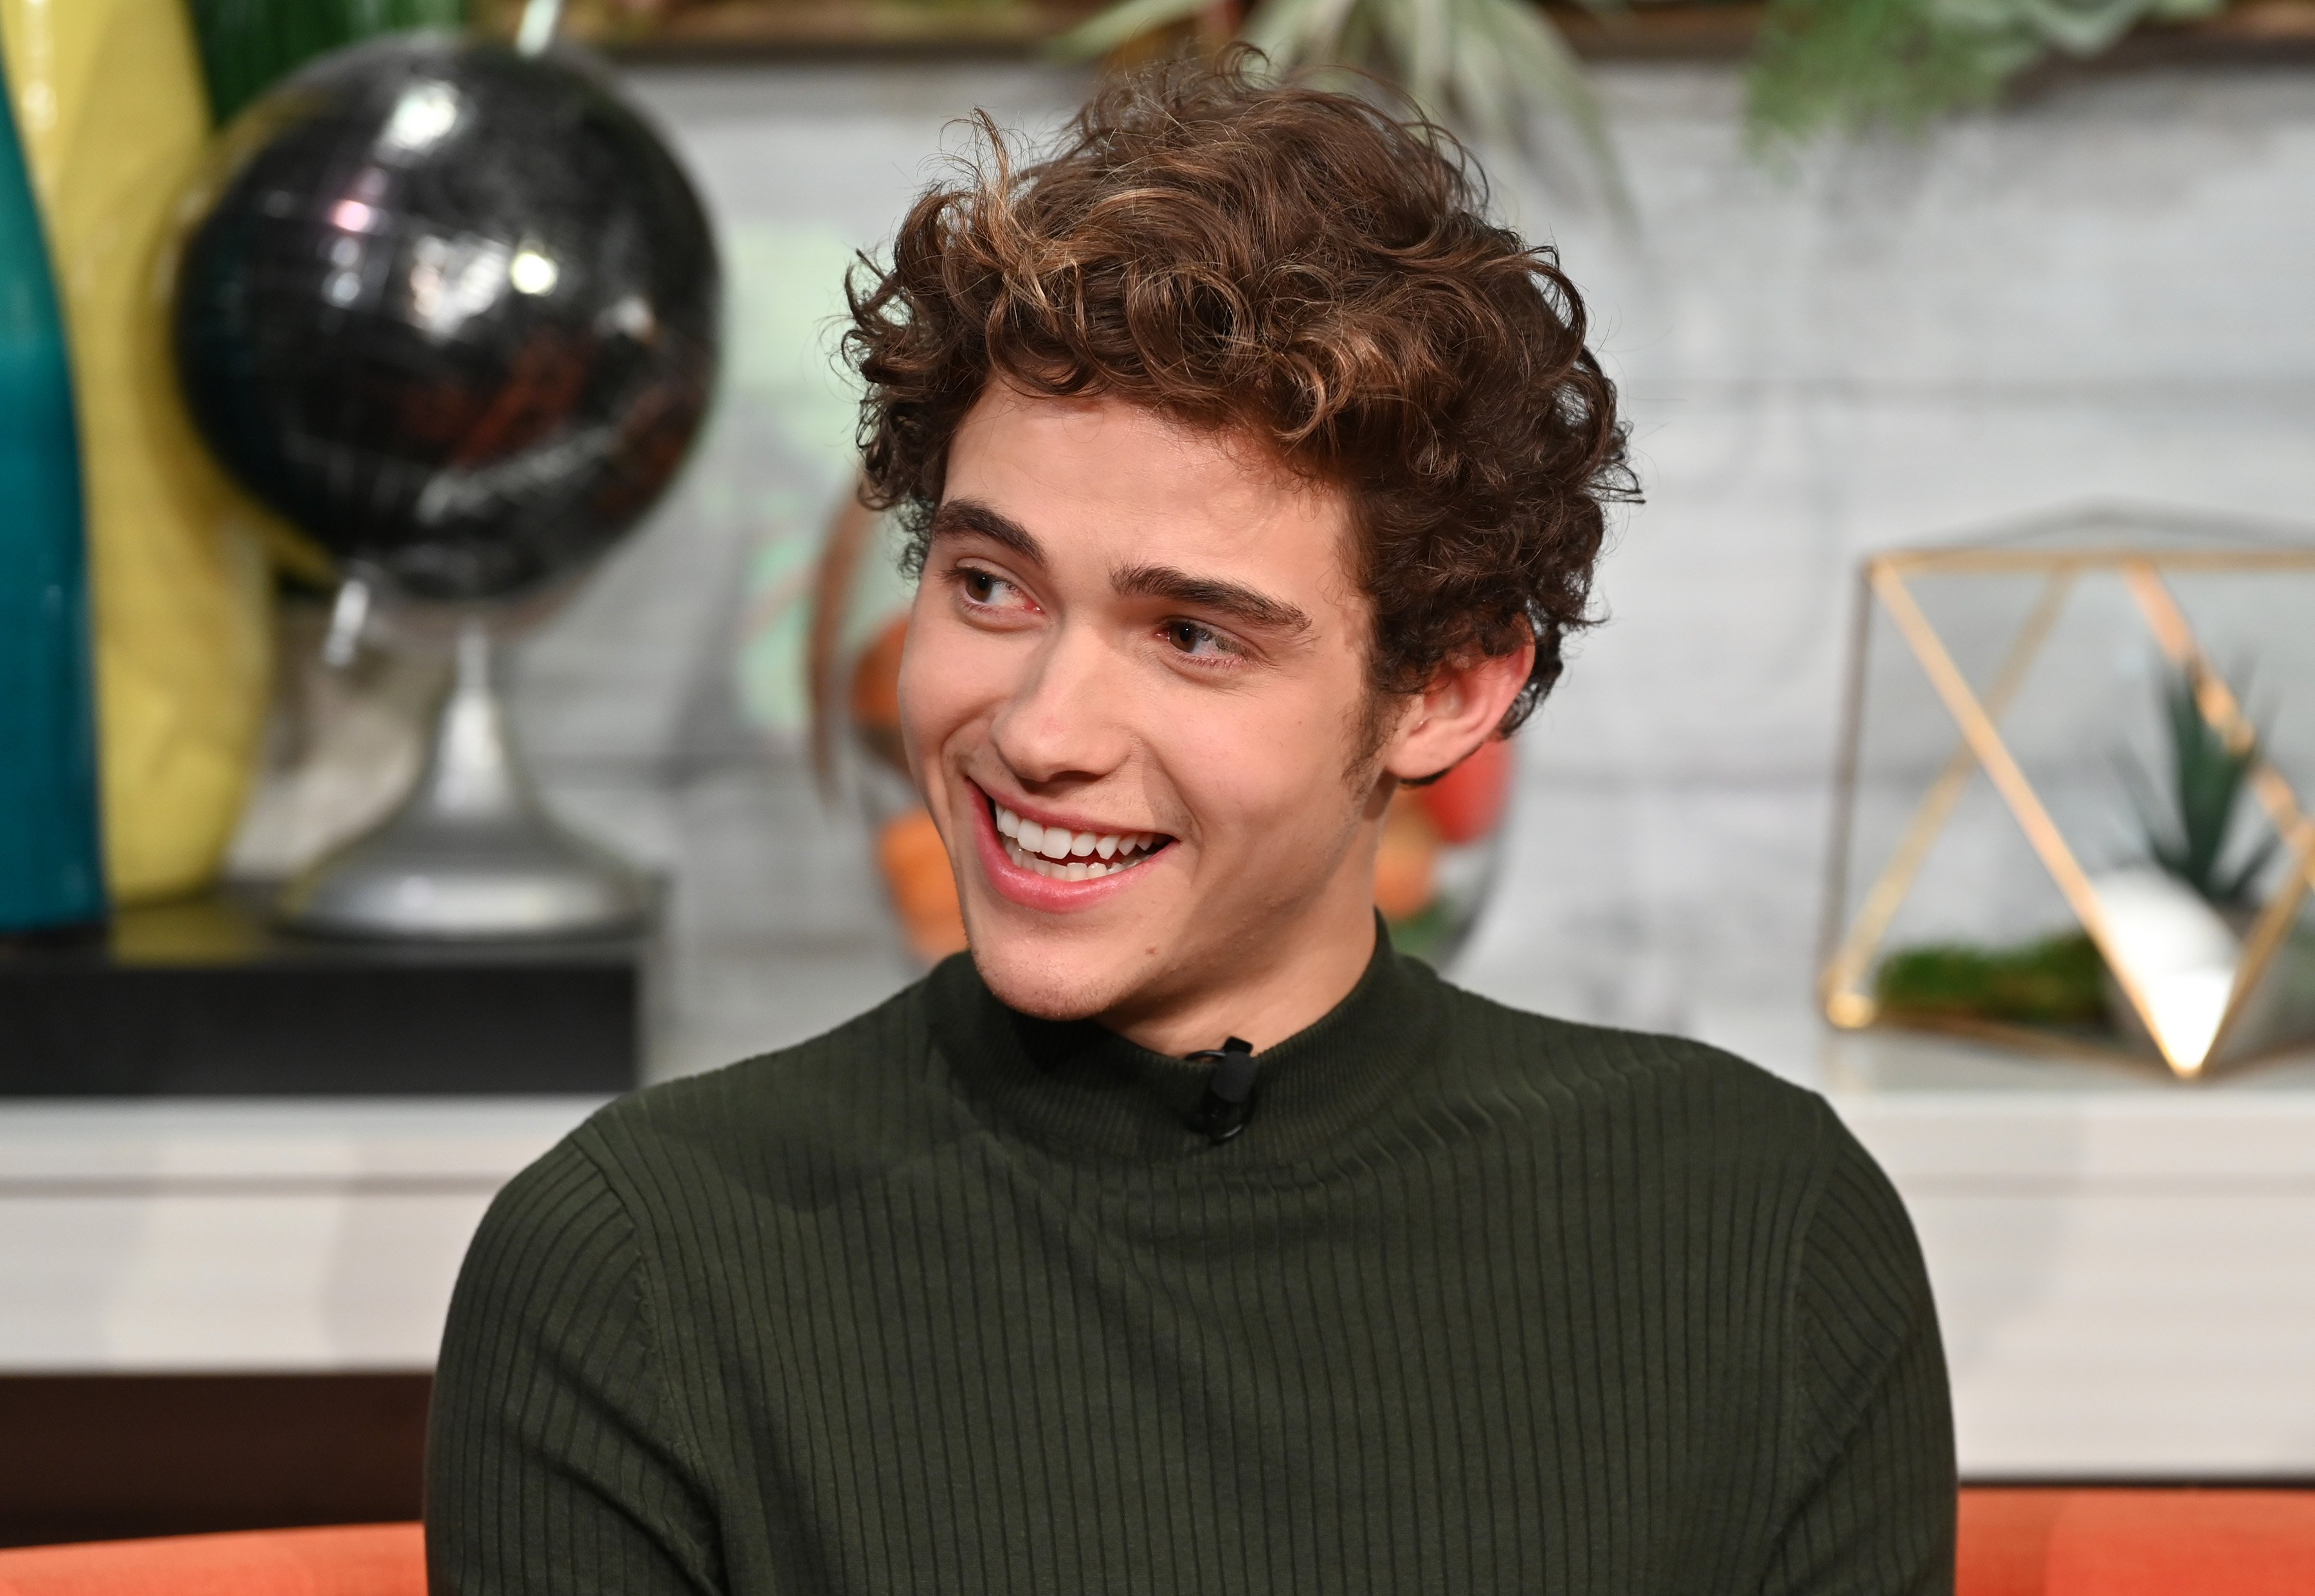 Actor Joshua Bassett visits BuzzFeed's 'AM To DM' to discuss Disney+ web television series 'High School Musical: The Musical: The Series' in green turtleneck